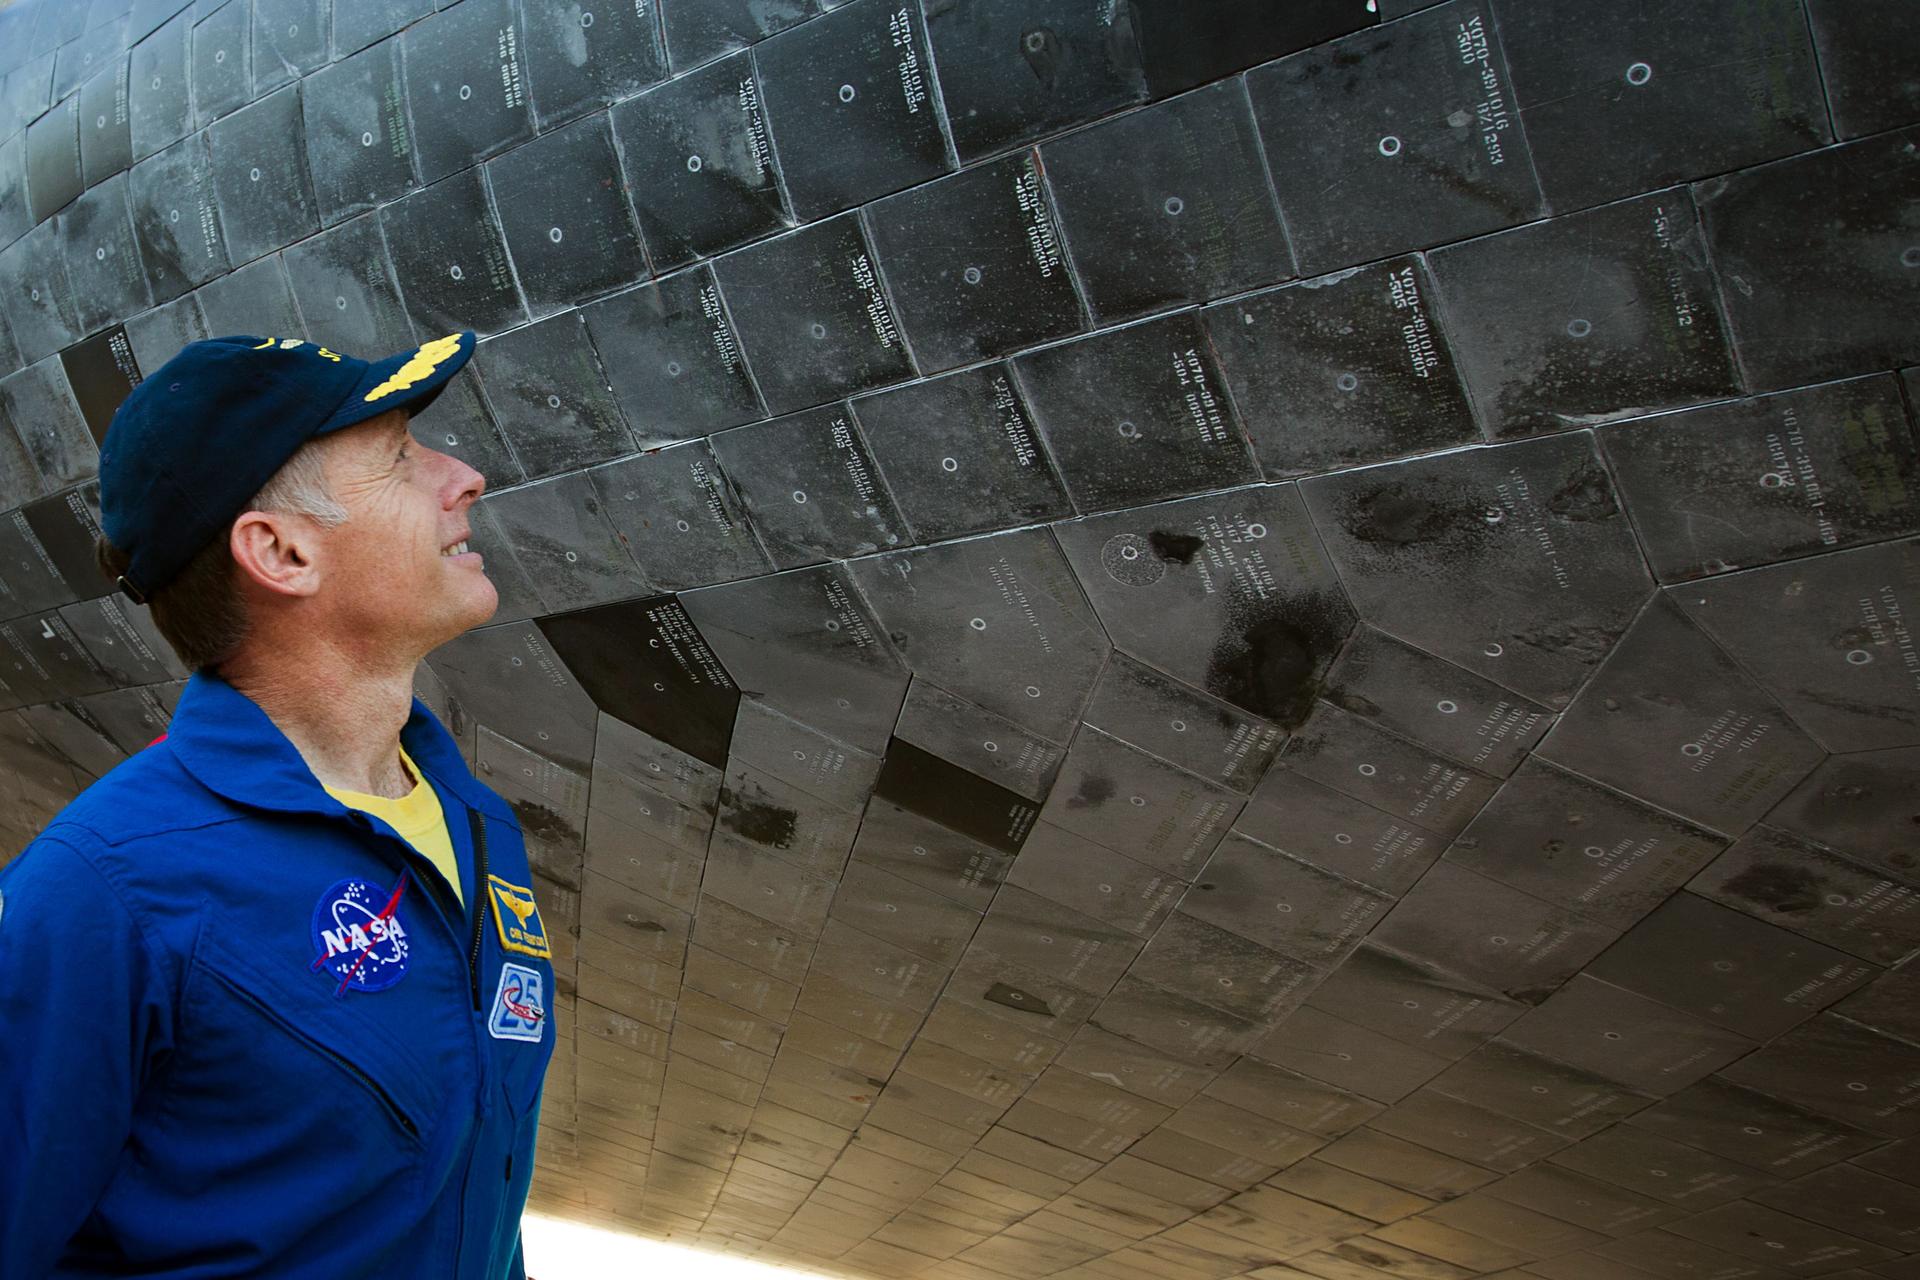 Chris Ferguson, commander of STS-135, examines the orbiter's thermal tiles after the space shuttle Atlantis completed the final mission of NASA's shuttle program in 2011.